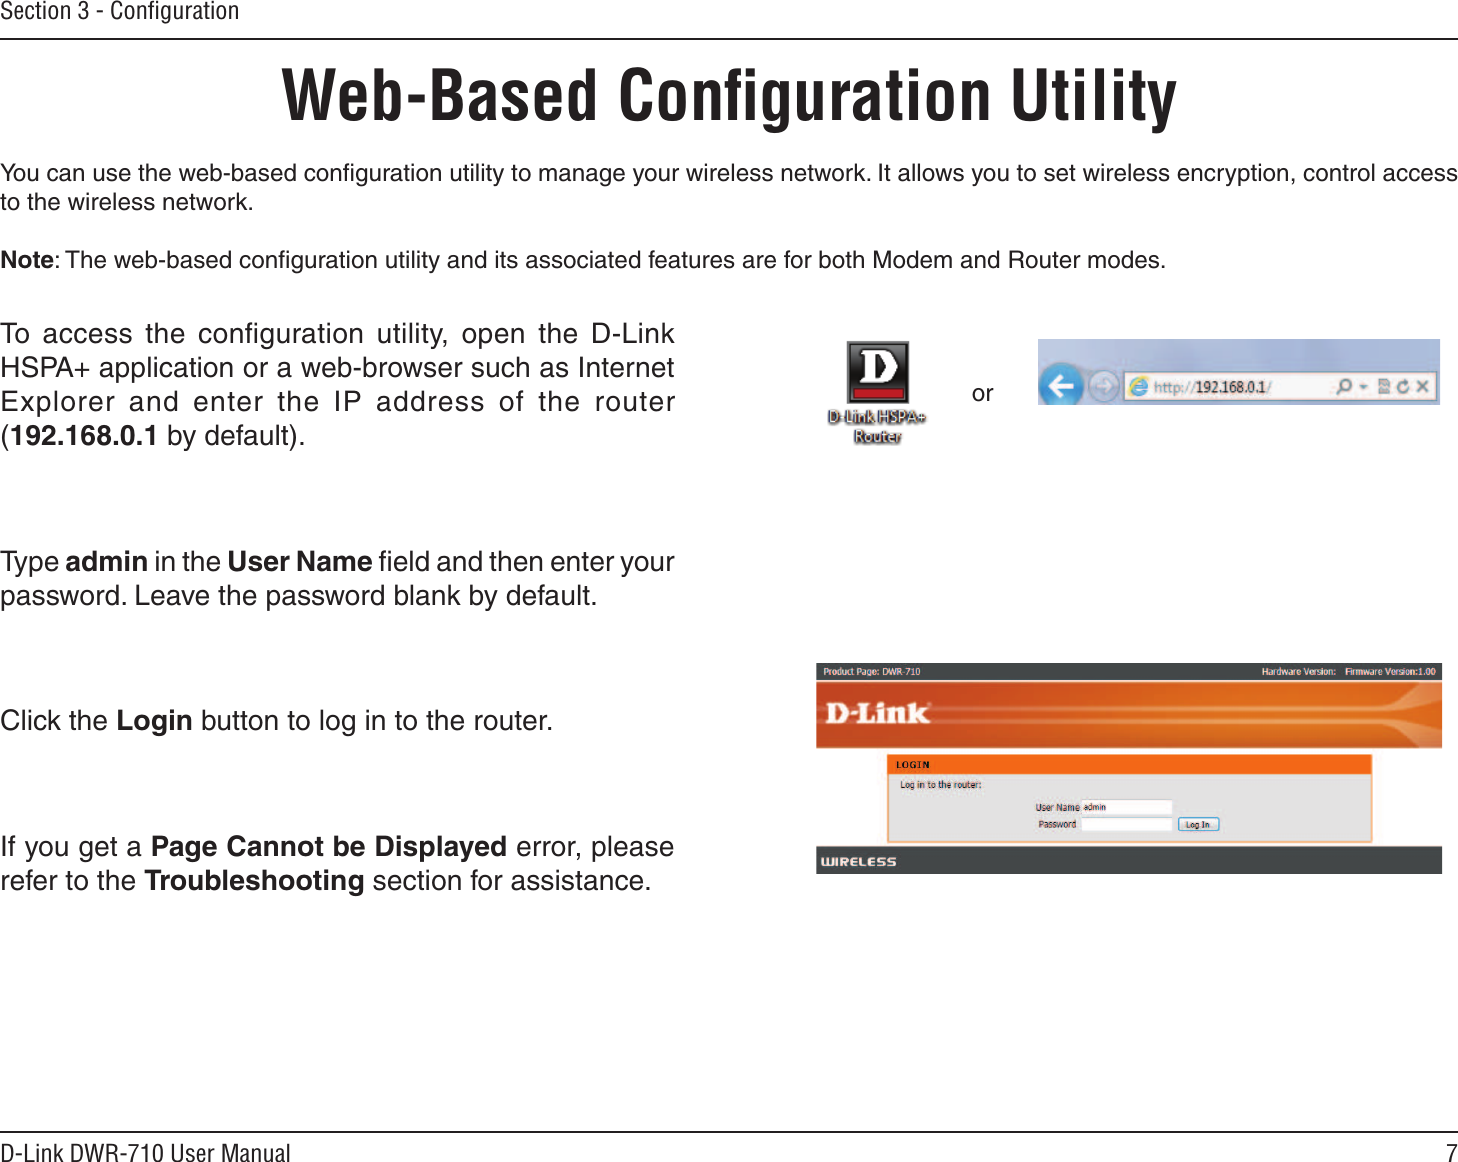 7D-Link DWR-710 User ManualSection 3 - ConﬁgurationWeb-Based Conﬁguration UtilityYou can use the web-based conﬁguration utility to manage your wireless network. It allows you to set wireless encryption, control access to the wireless network.Note: The web-based conﬁguration utility and its associated features are for both Modem and Router modes.To  access  the  conﬁguration  utility,  open  the  D-Link HSPA+ application or a web-browser such as Internet Explorer  and  enter  the  IP  address  of  the  router (192.168.0.1 by default).Type admin in the User Name ﬁeld and then enter your password. Leave the password blank by default. Click the Login button to log in to the router.If you get a Page Cannot be Displayed error, please refer to the Troubleshooting section for assistance.or